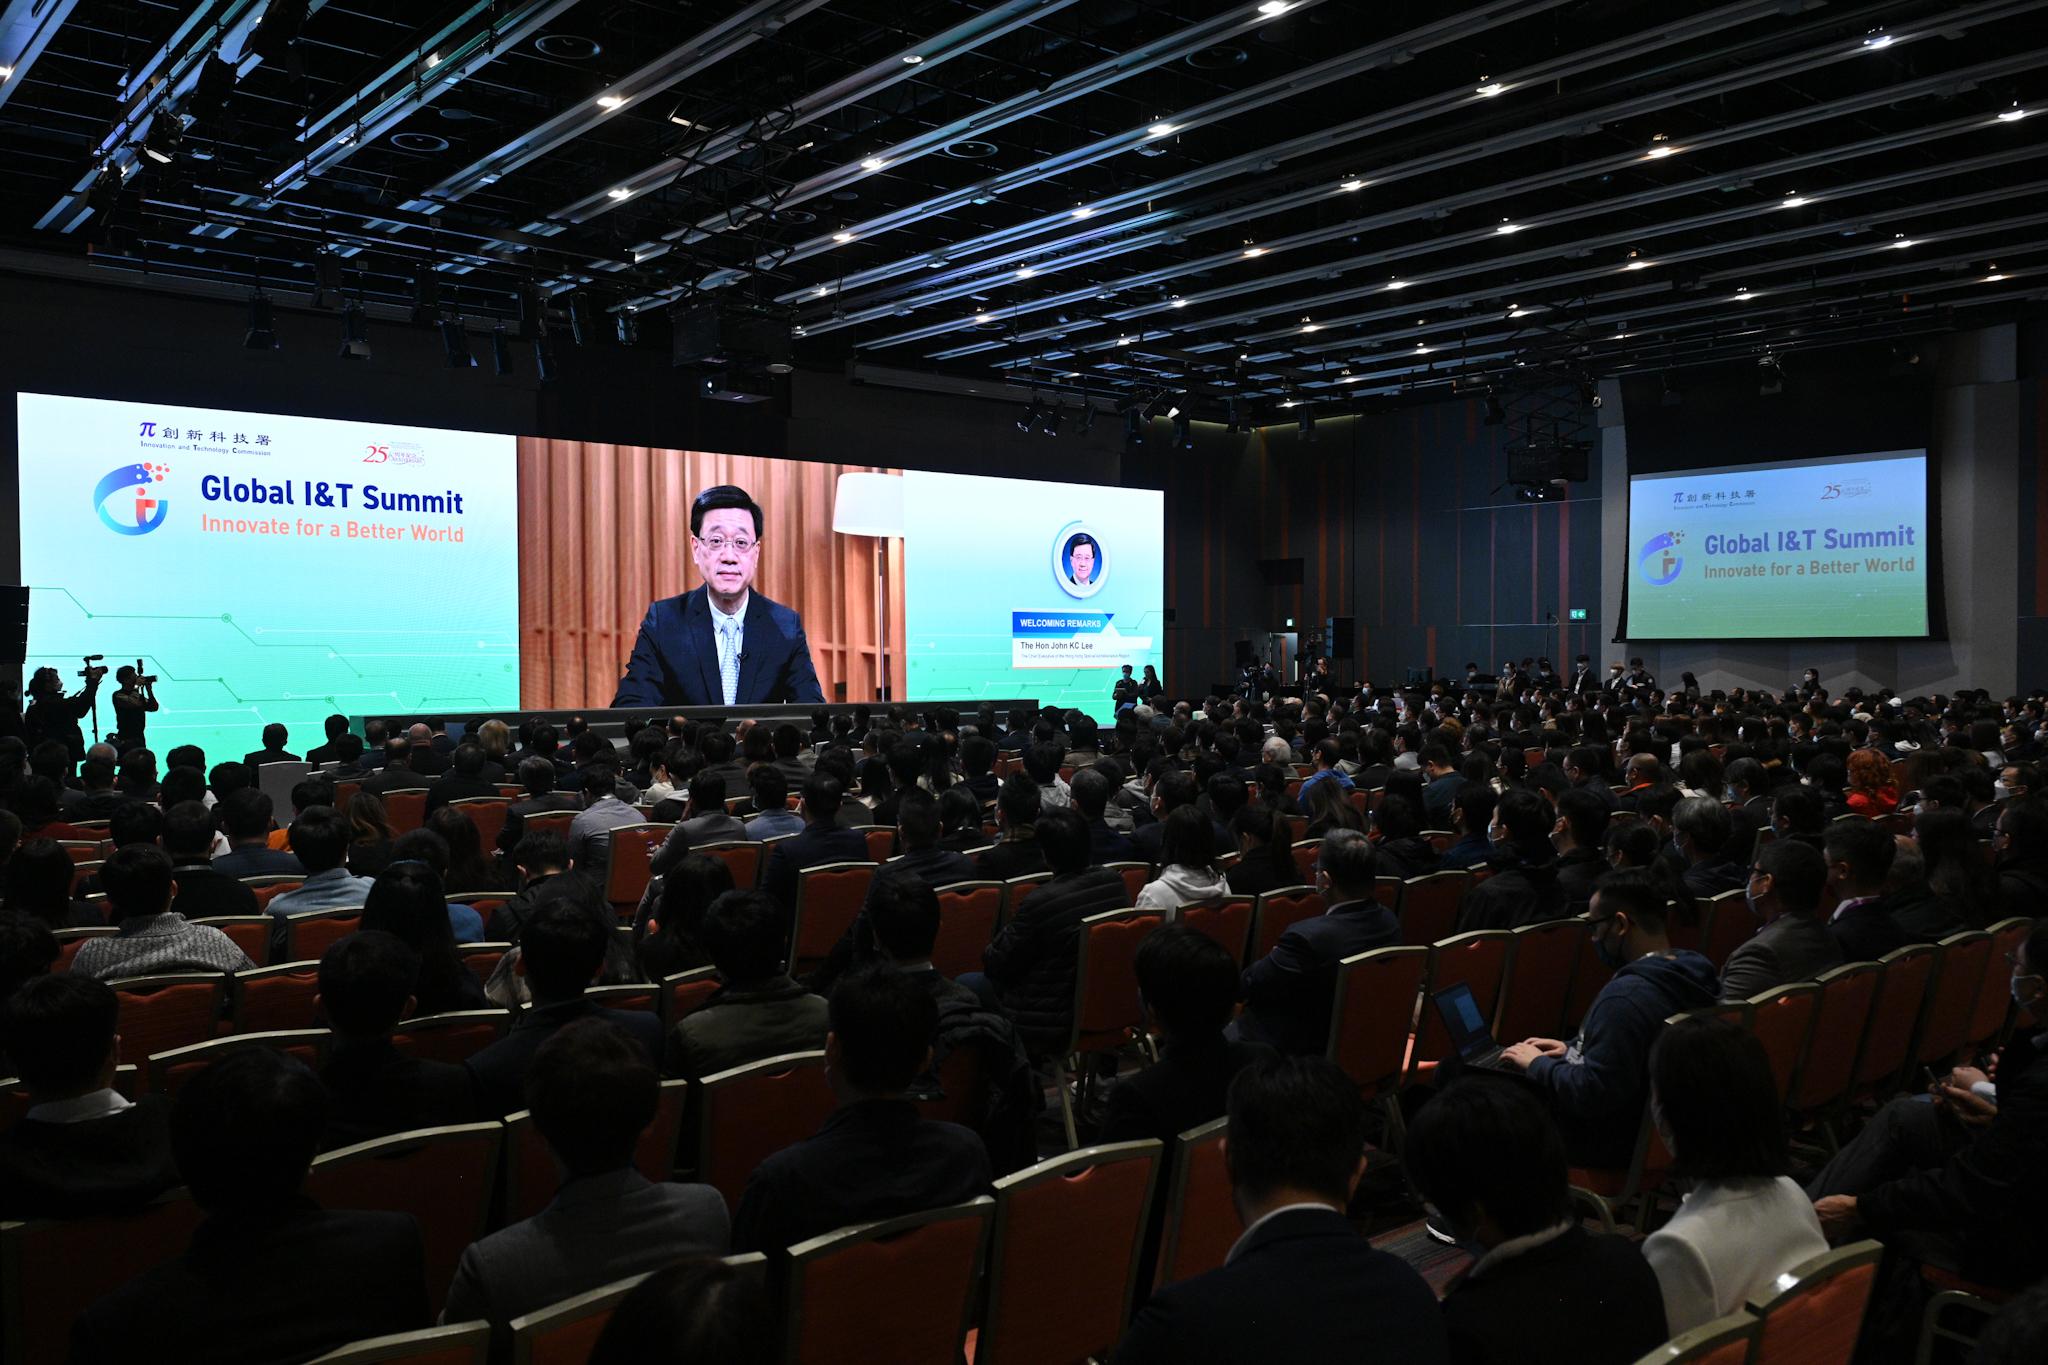 The Chief Executive, Mr John Lee, delivers a pre-recorded welcoming speech at the Global I&T Summit today (December 15).